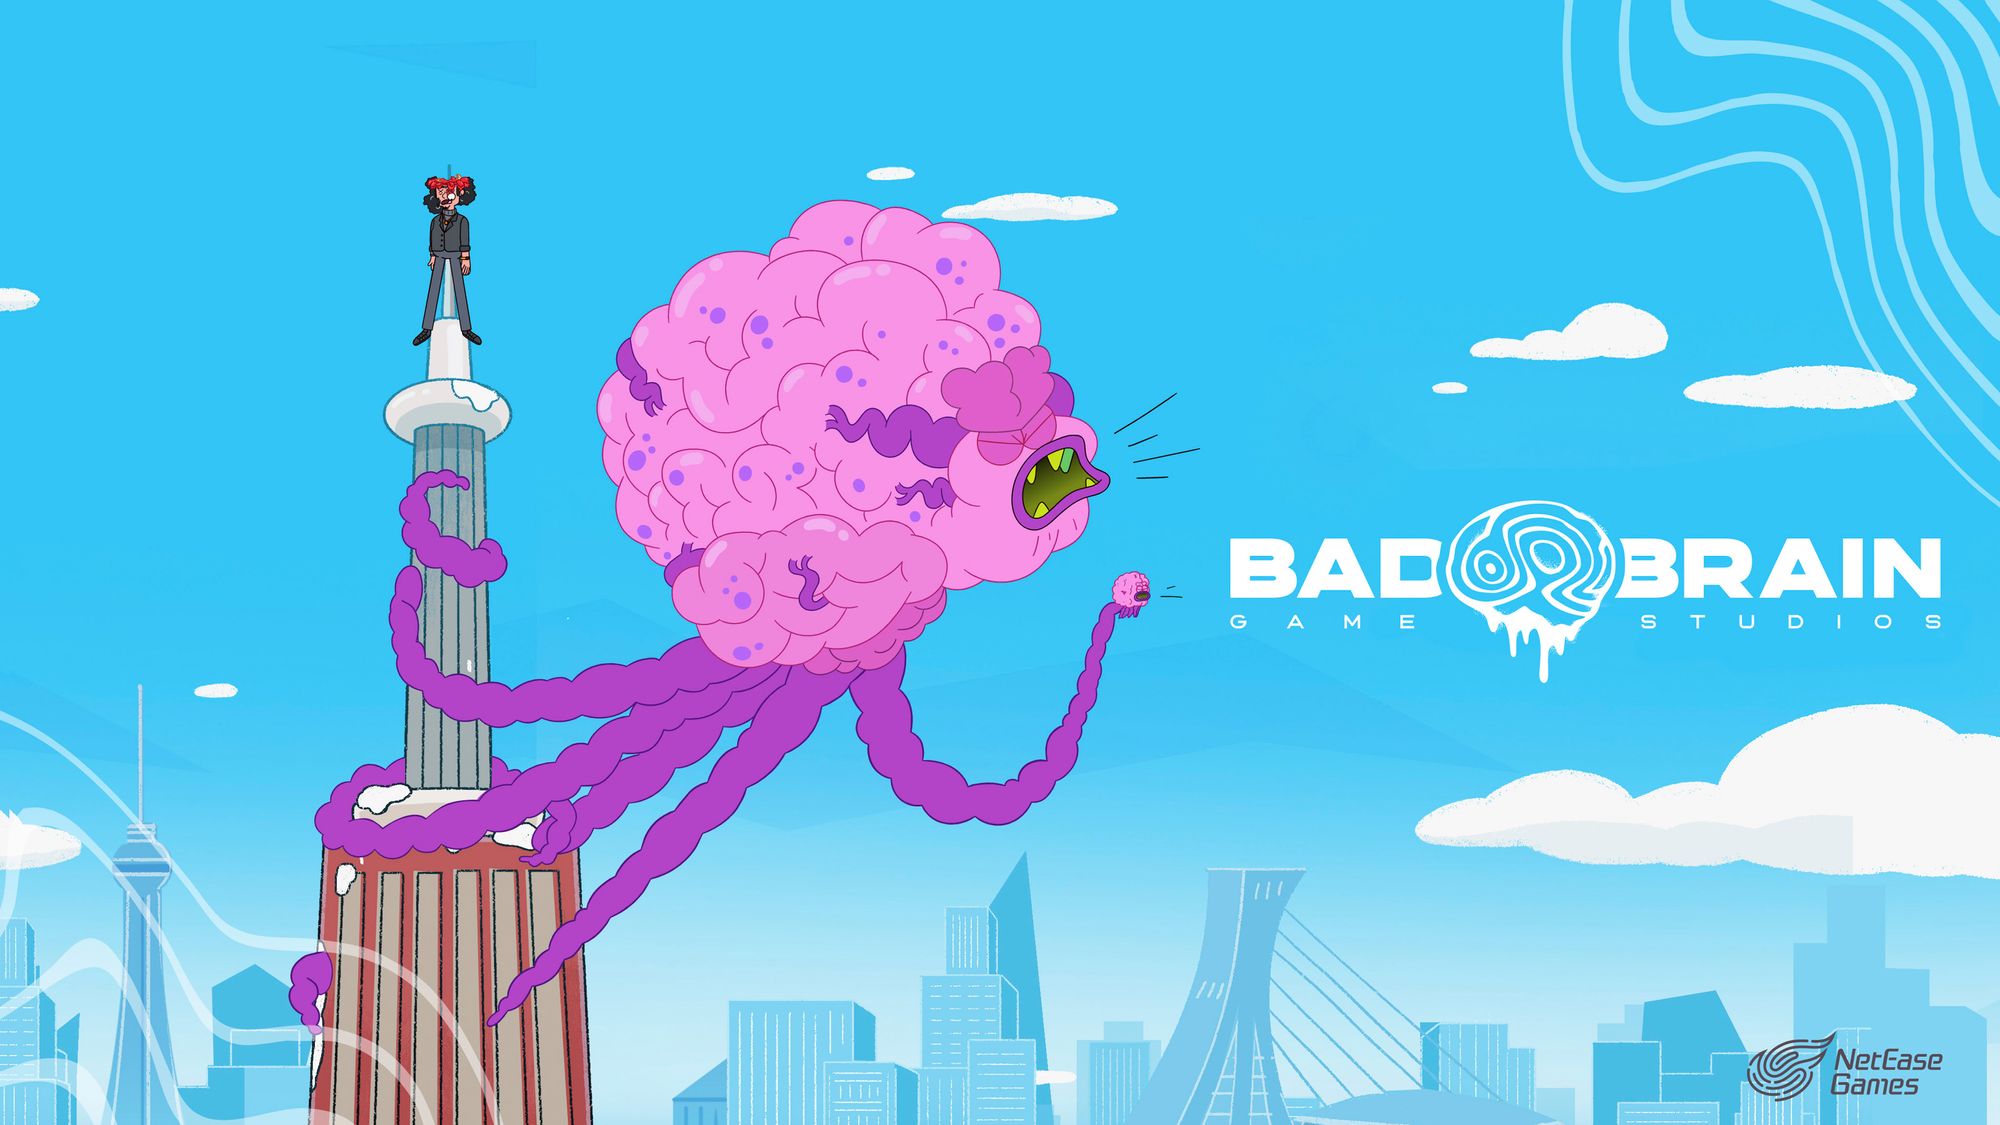 Bad Brain Game Studios is looking for Passionate Game Developers at their Toronto & Montreal locations.